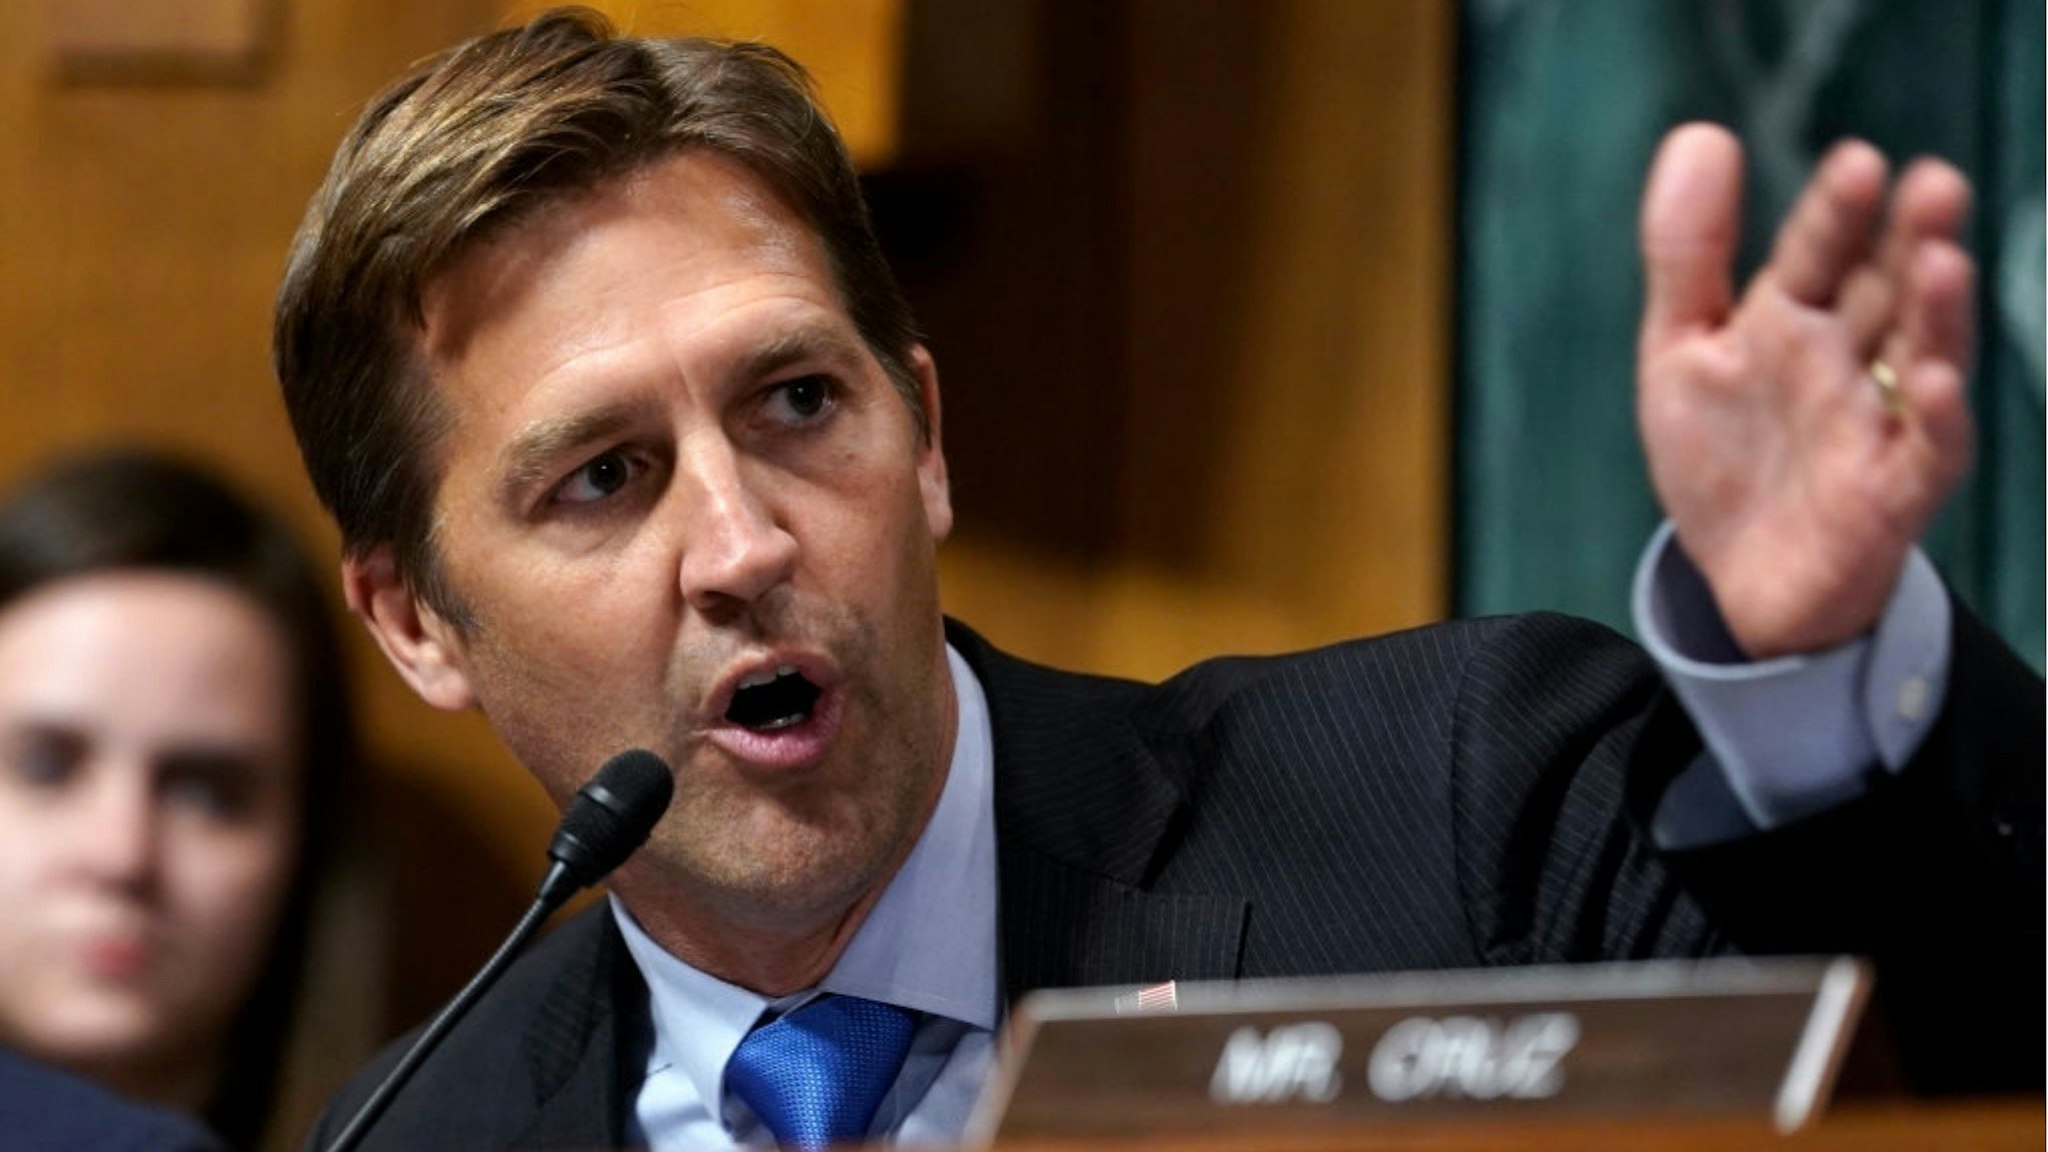 Sen. Ben Sasse, R-Neb., questions Supreme Court nominee Brett Kavanaugh as he testifies before the Senate Judiciary Committee on Capitol Hill on September 27, 2018 in Washington, DC.